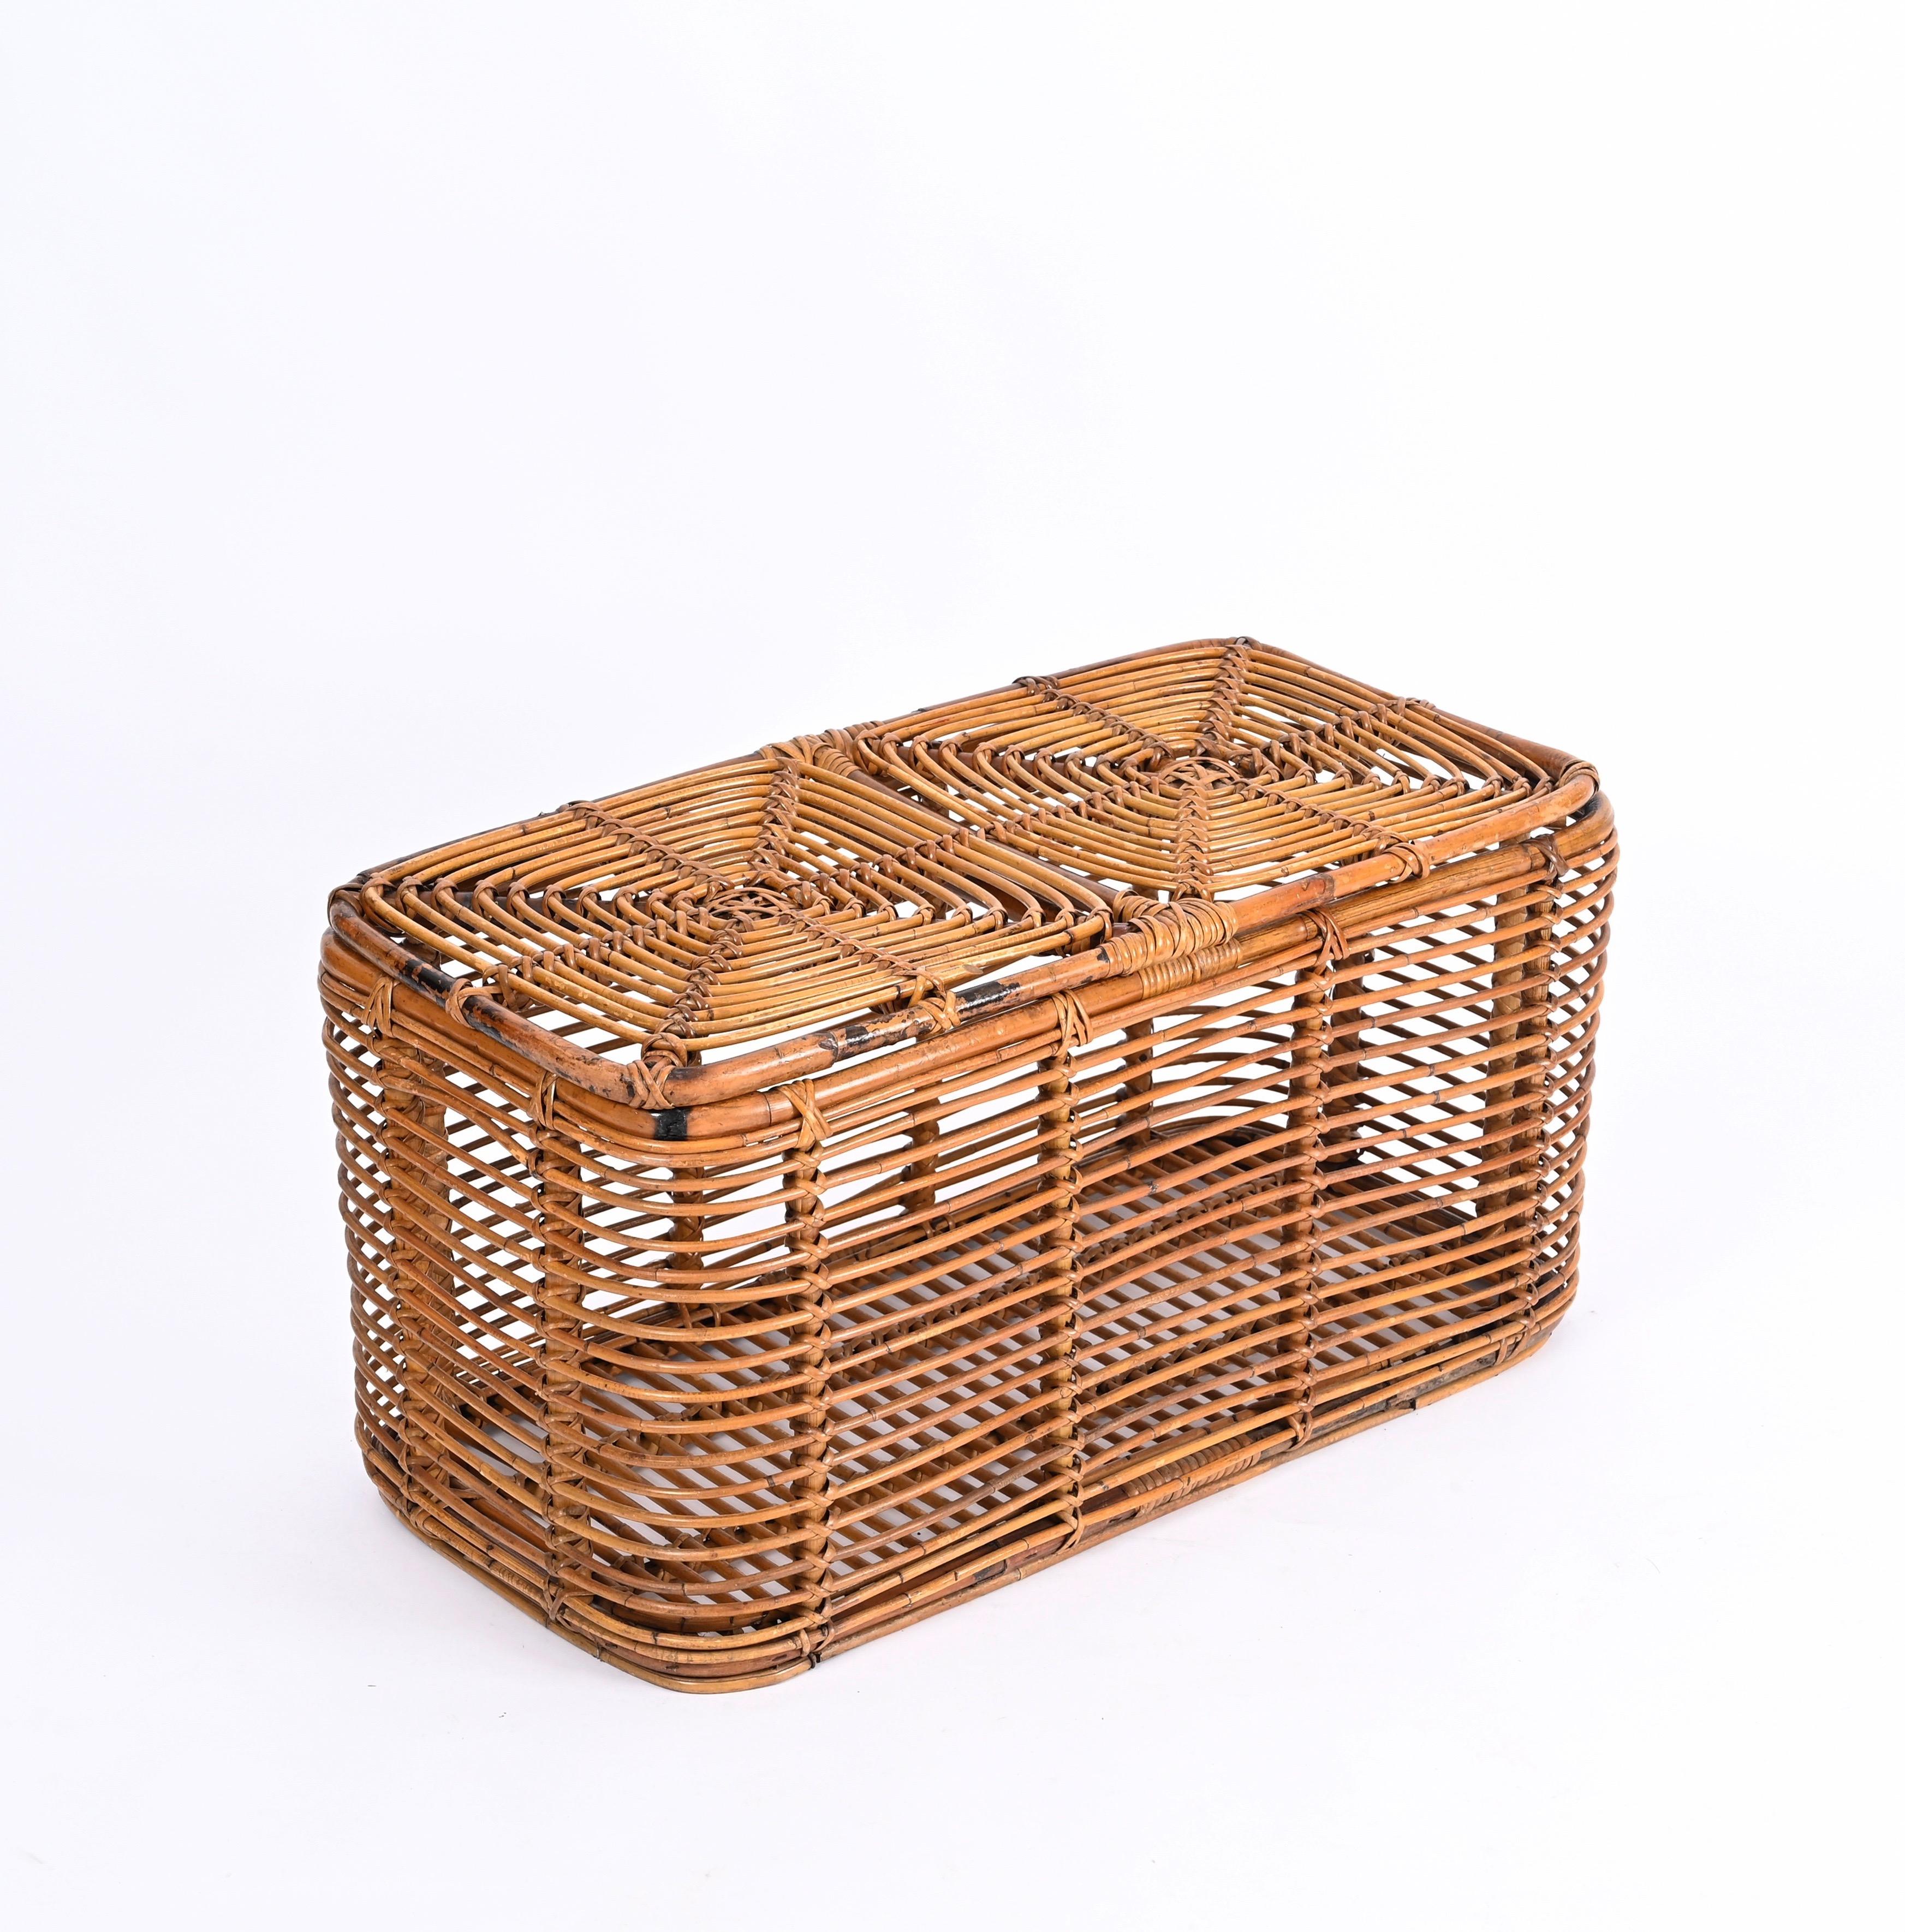 Midcentury French Riviera Bamboo and Woven Rattan Italian Basket, 1960s For Sale 4